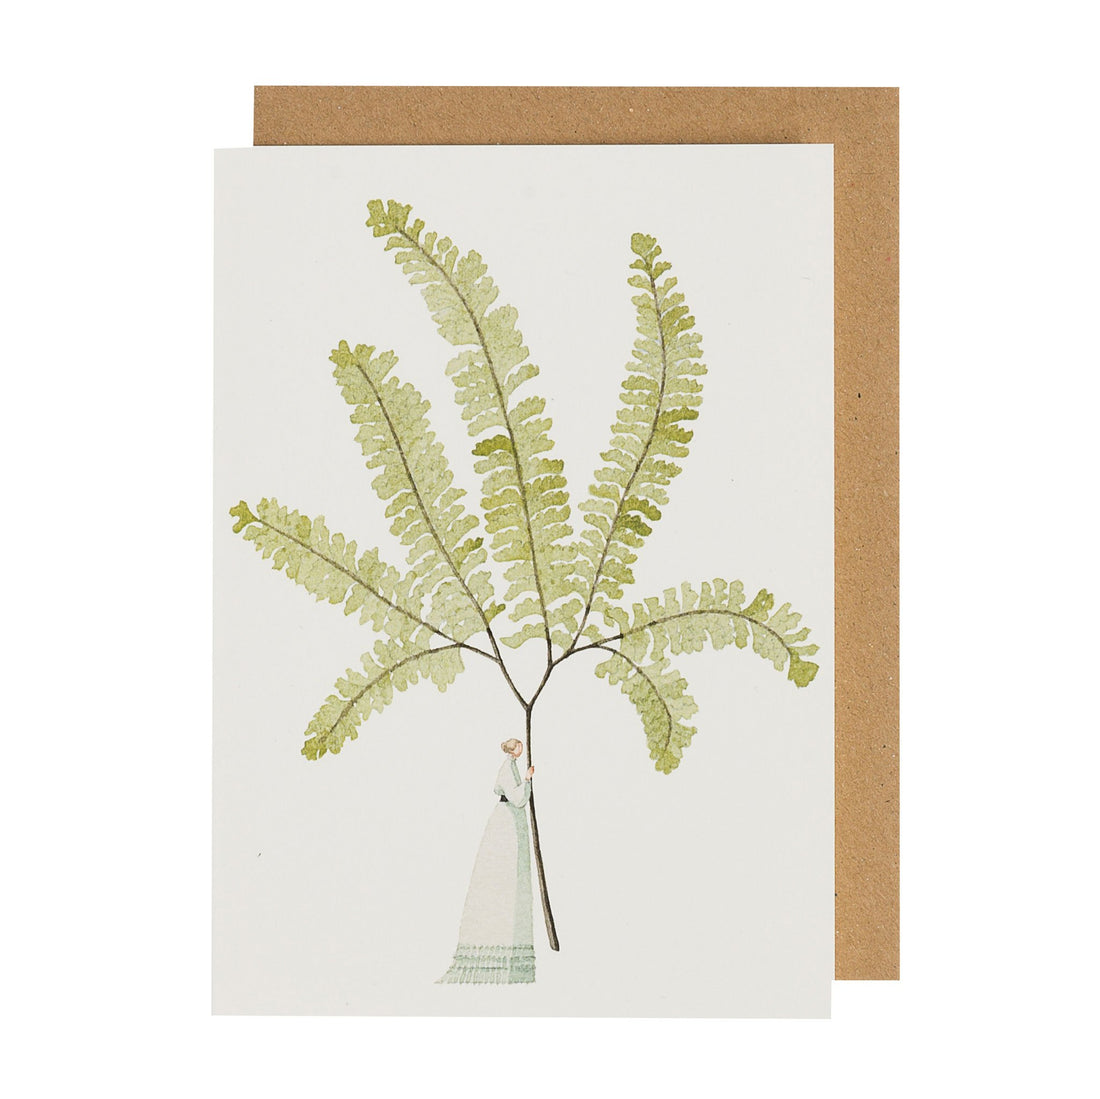 A greeting card featuring a stylized watercolor illustration of a small woman holding a gigantic fern frond by the stem on a white background, with the included kraft paper envelope.